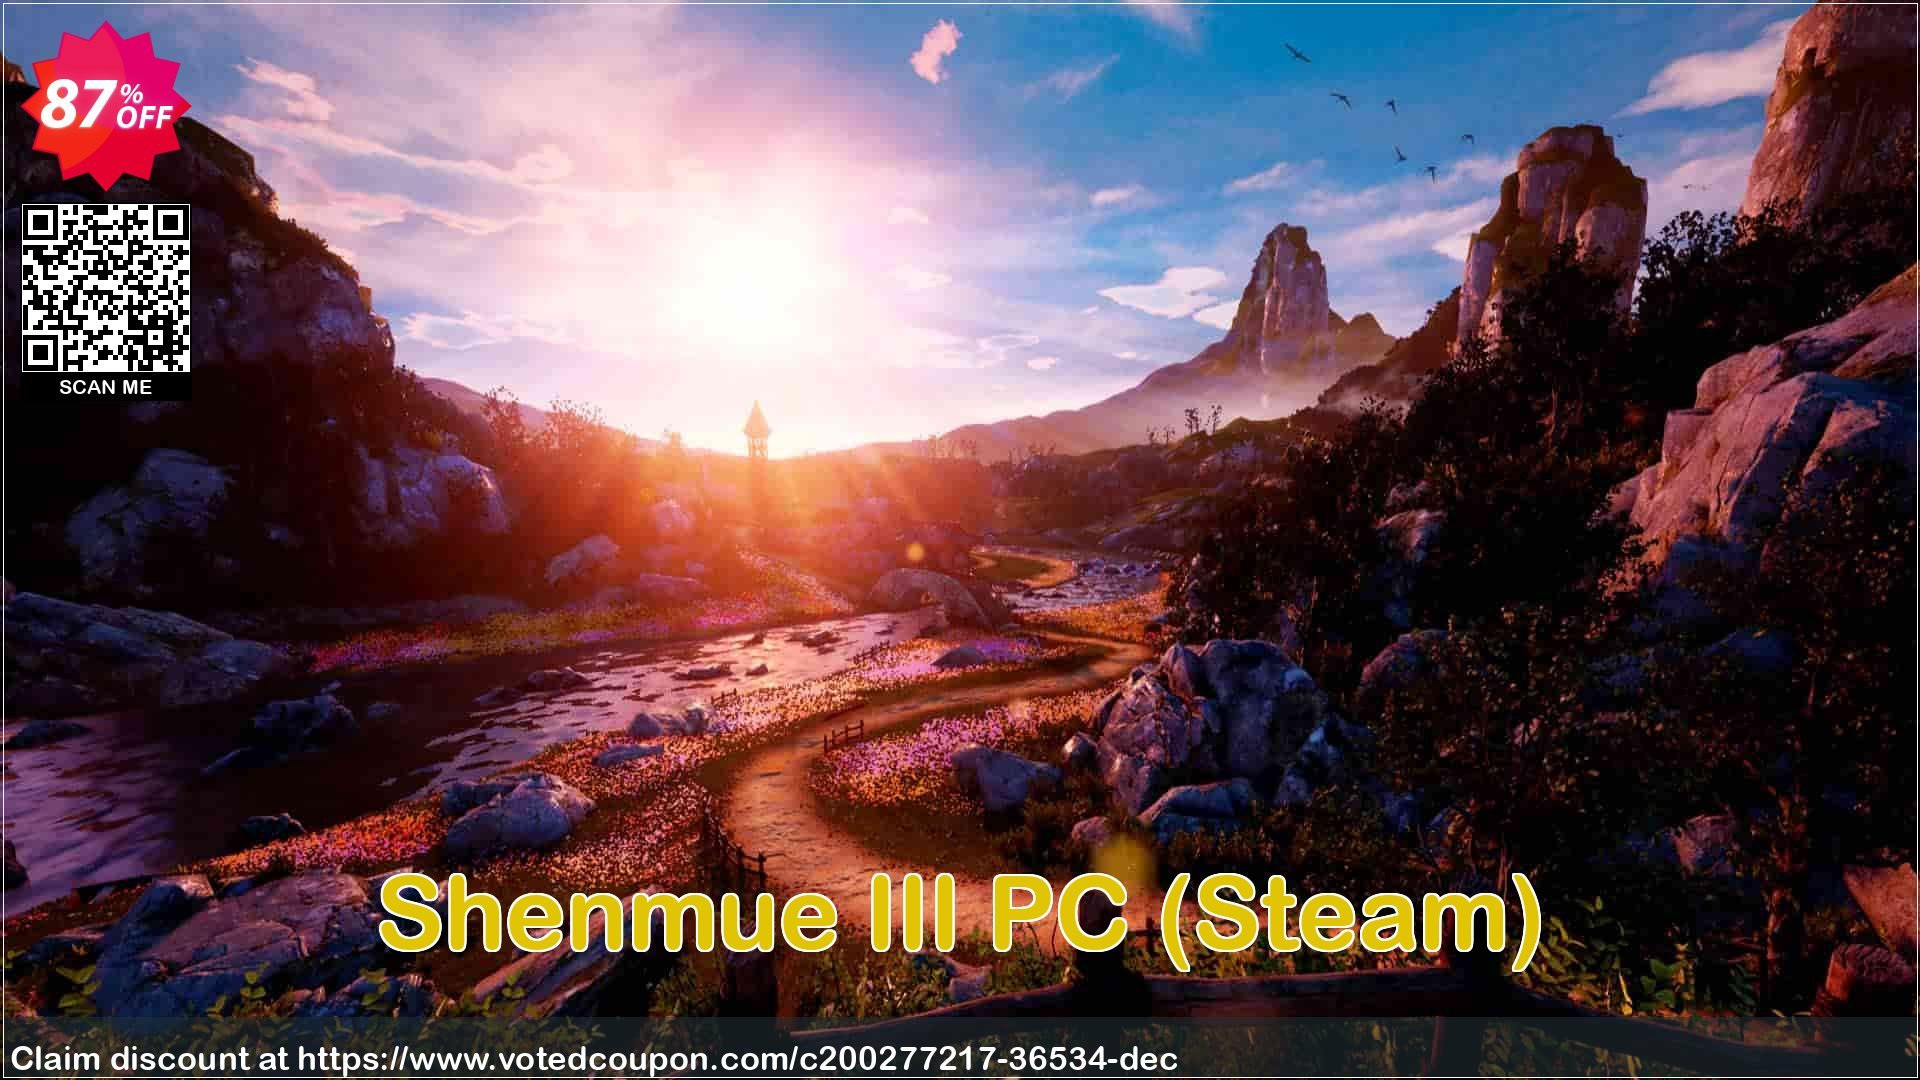 Shenmue III PC, Steam  Coupon Code May 2024, 87% OFF - VotedCoupon